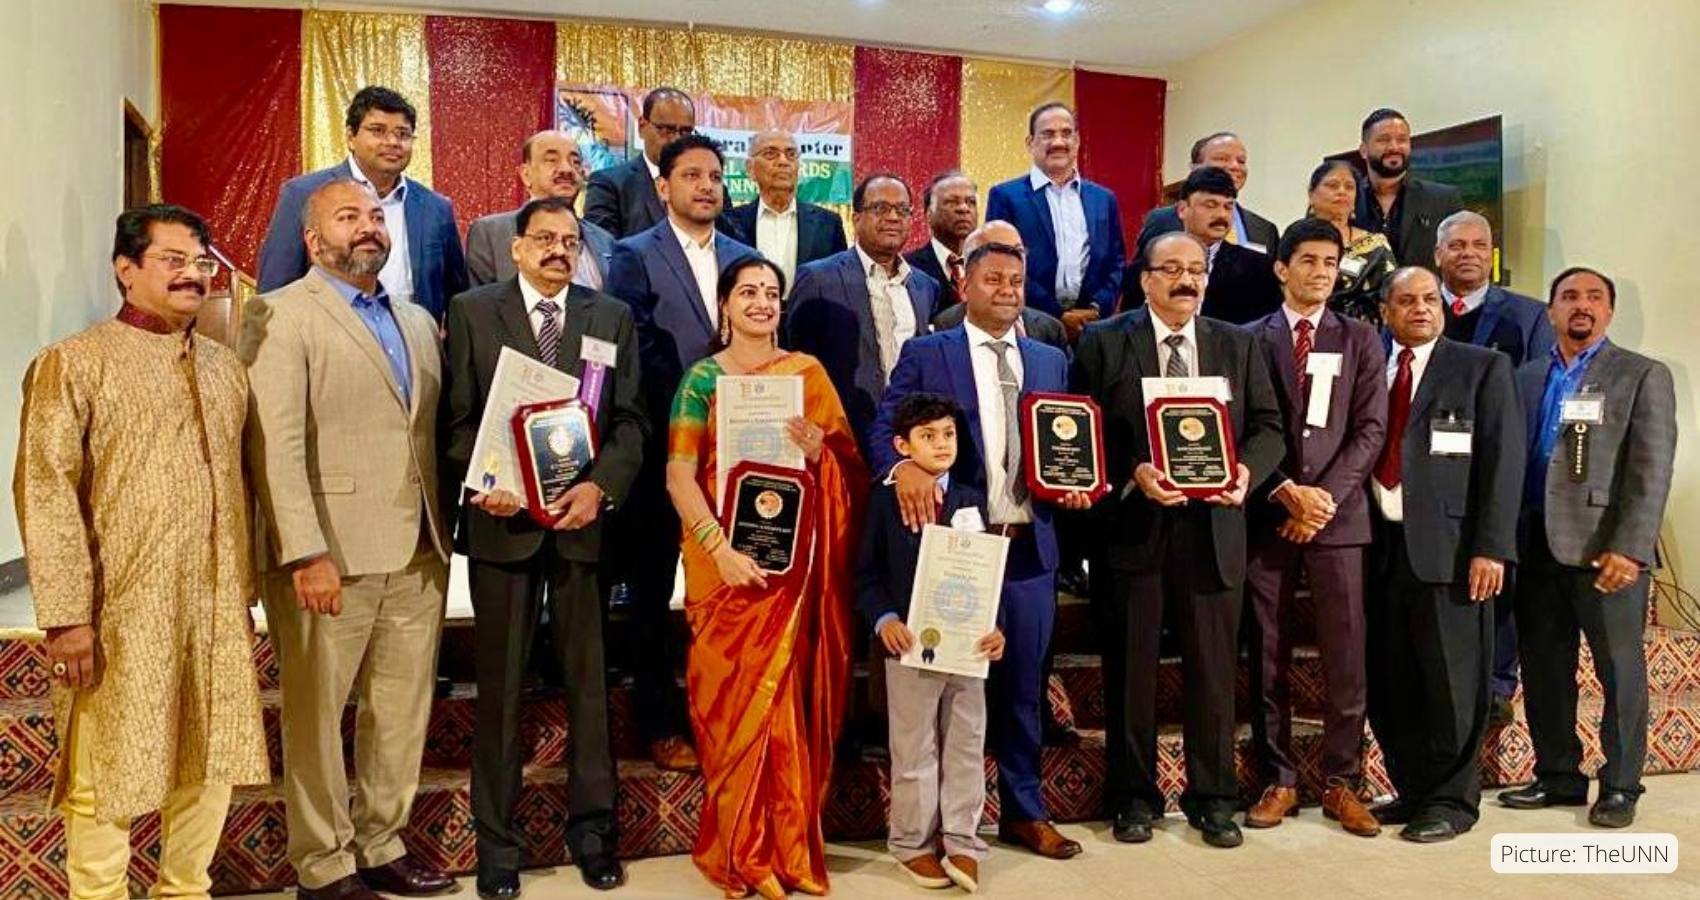 The Kerala Center Presents The 2022 Annual Awards